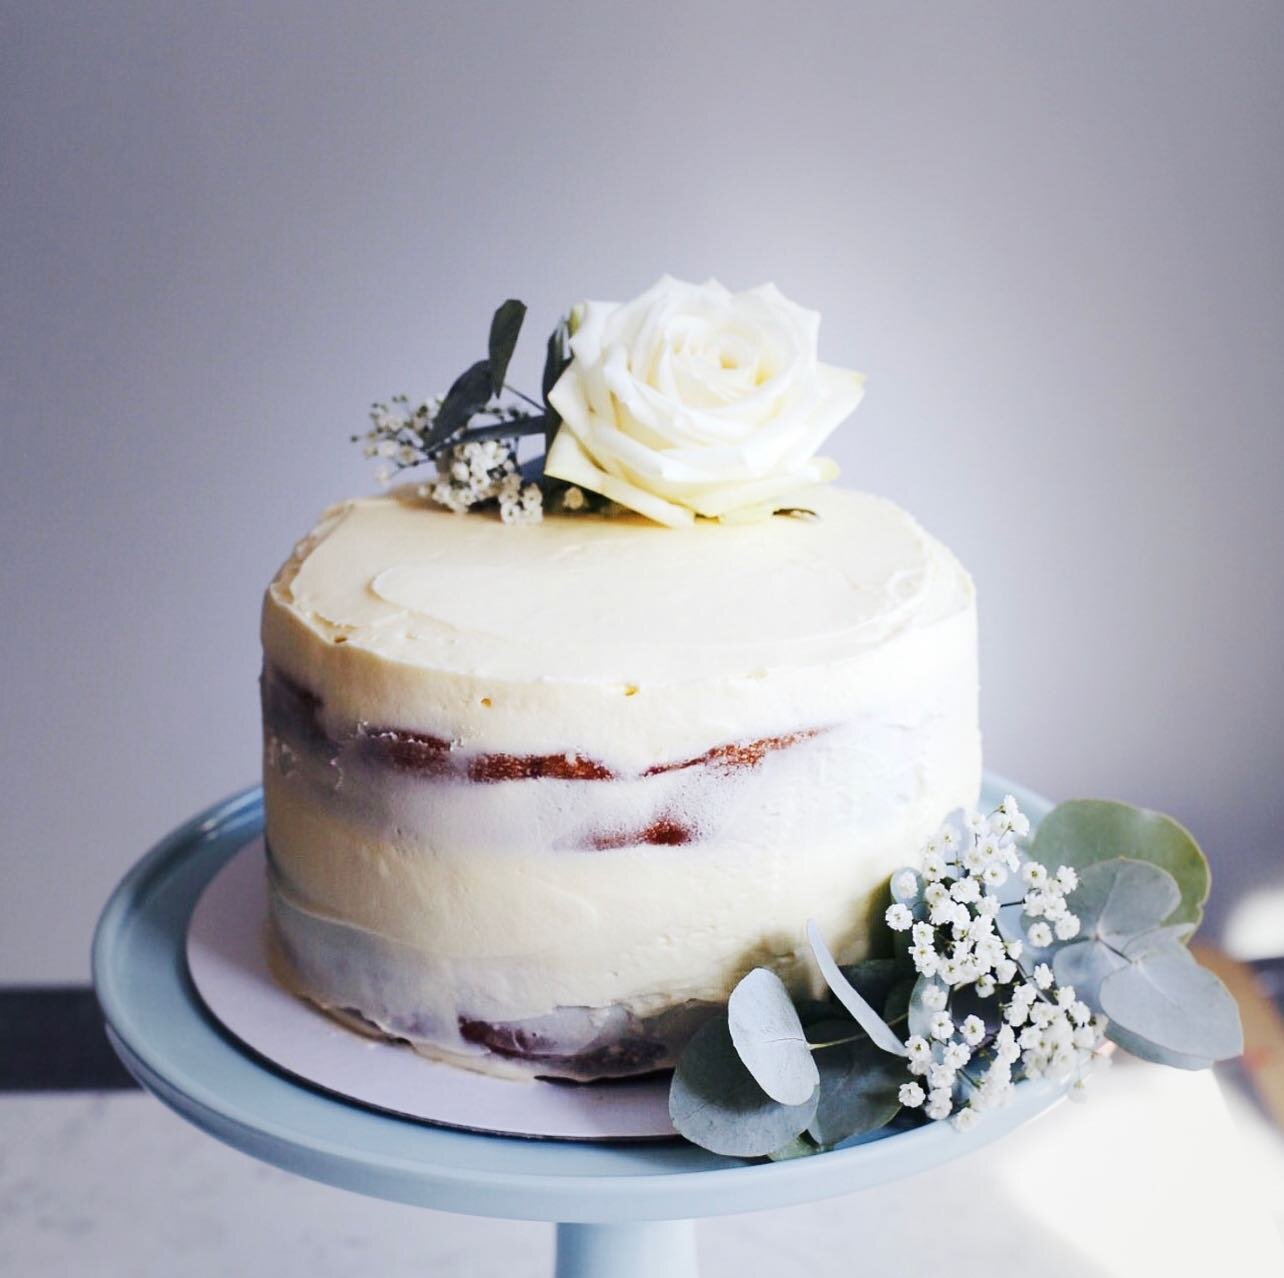 Summertime Cake.
Now, if these are two words you don't believe should go together, consider this:
Two deep, lemony, layers filled with tangy raspberries, lightly covered by a cloud-like whipped cream, cream cheese icing.
Plays well with lunch alfresc